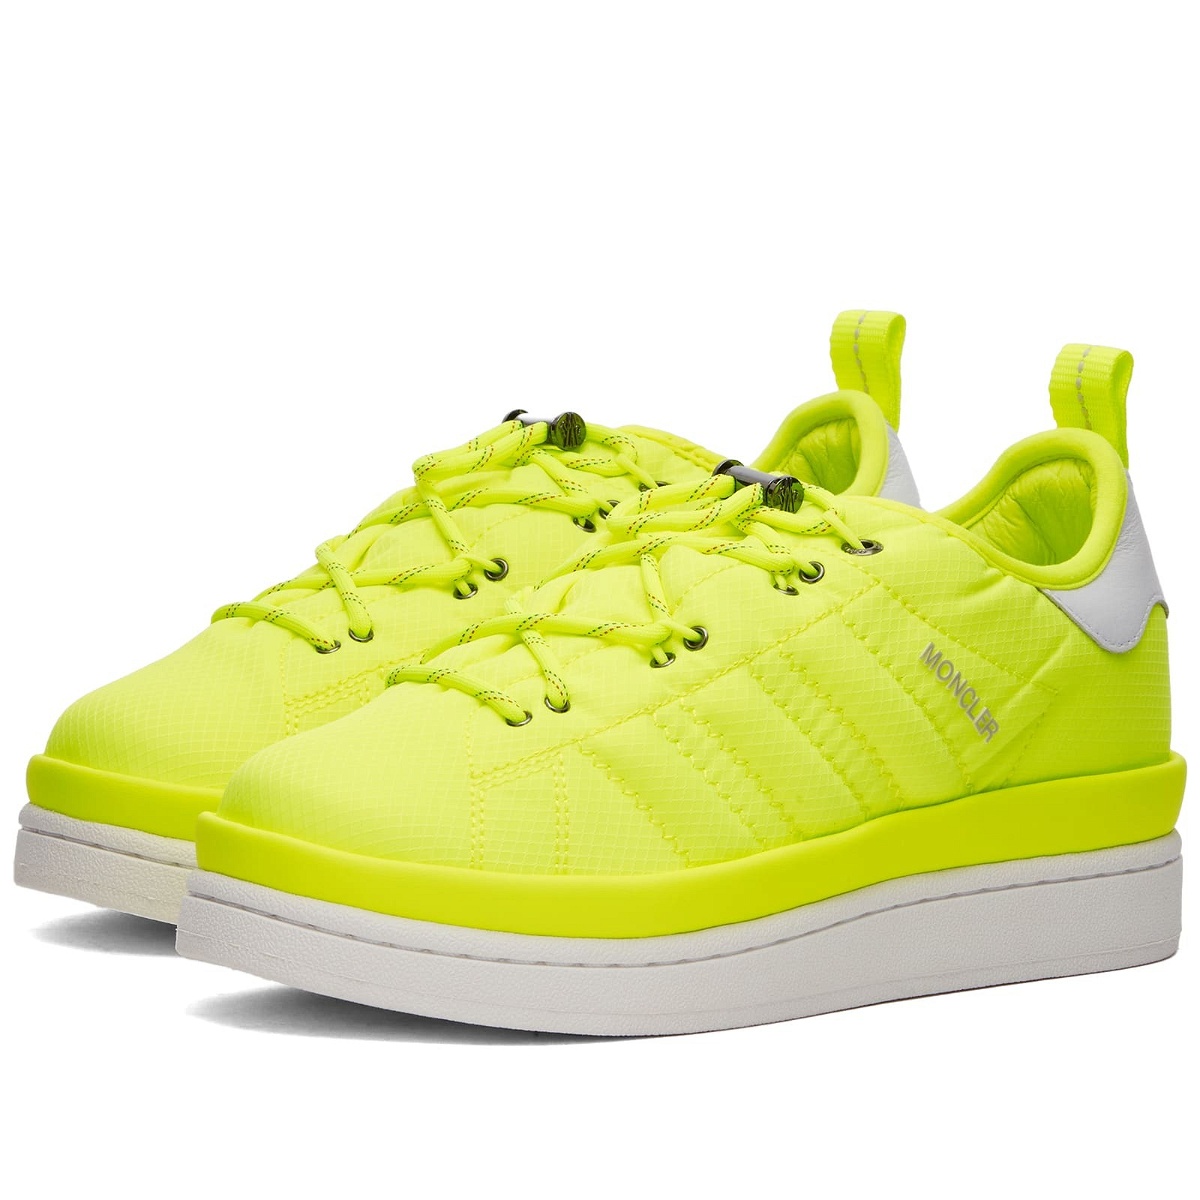 Photo: Moncler x adidas Originals Campus Sneakers in Yellow